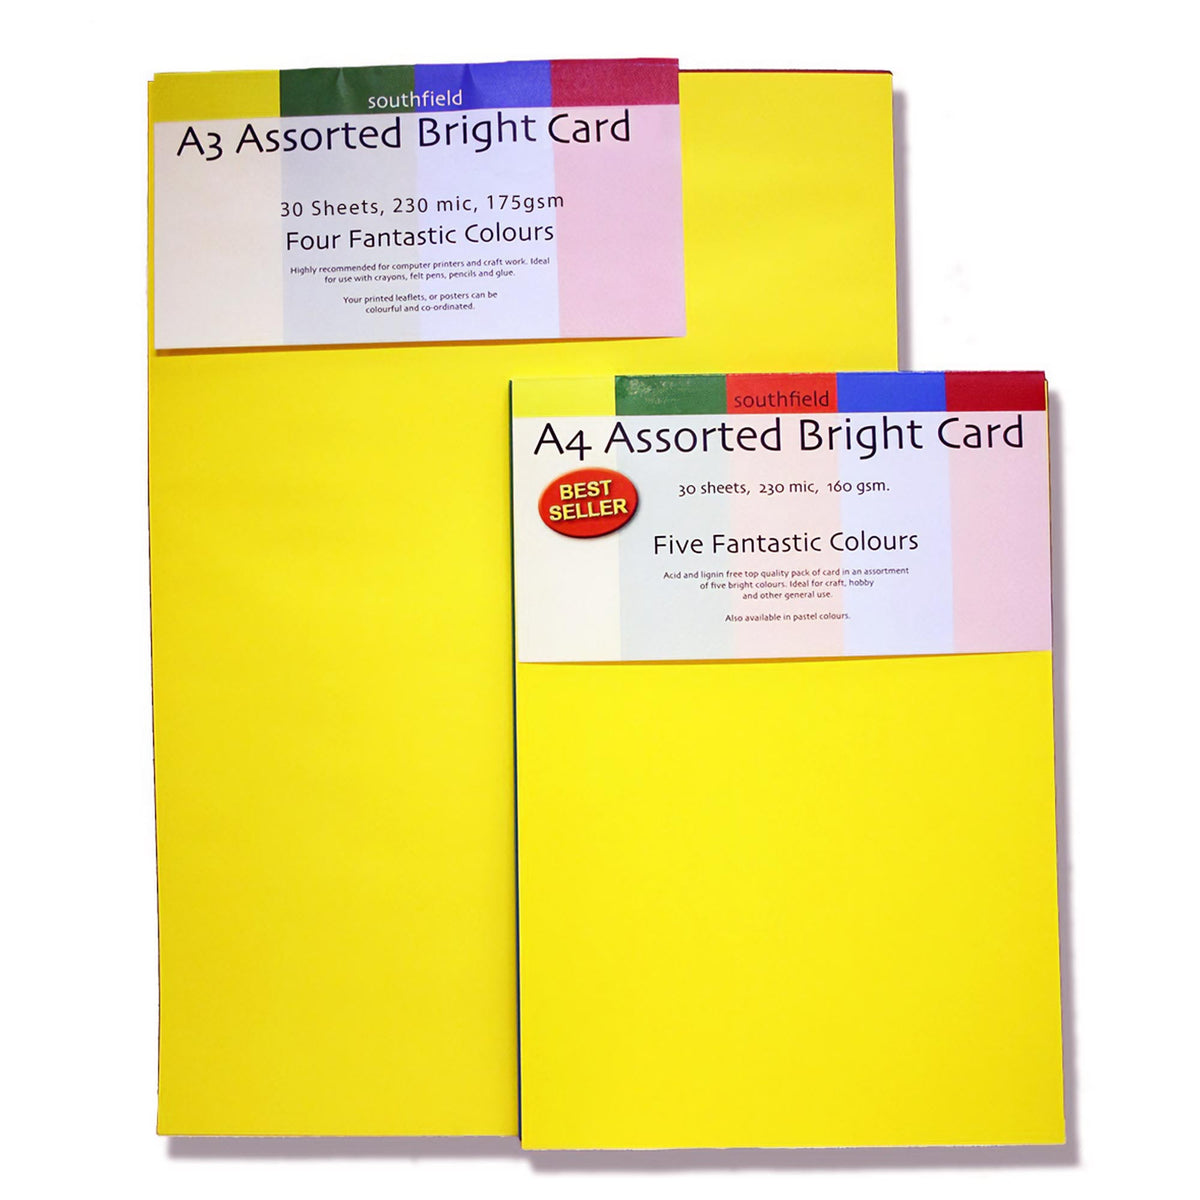 Southfield Assorted Bright Card - A3 &amp; A4